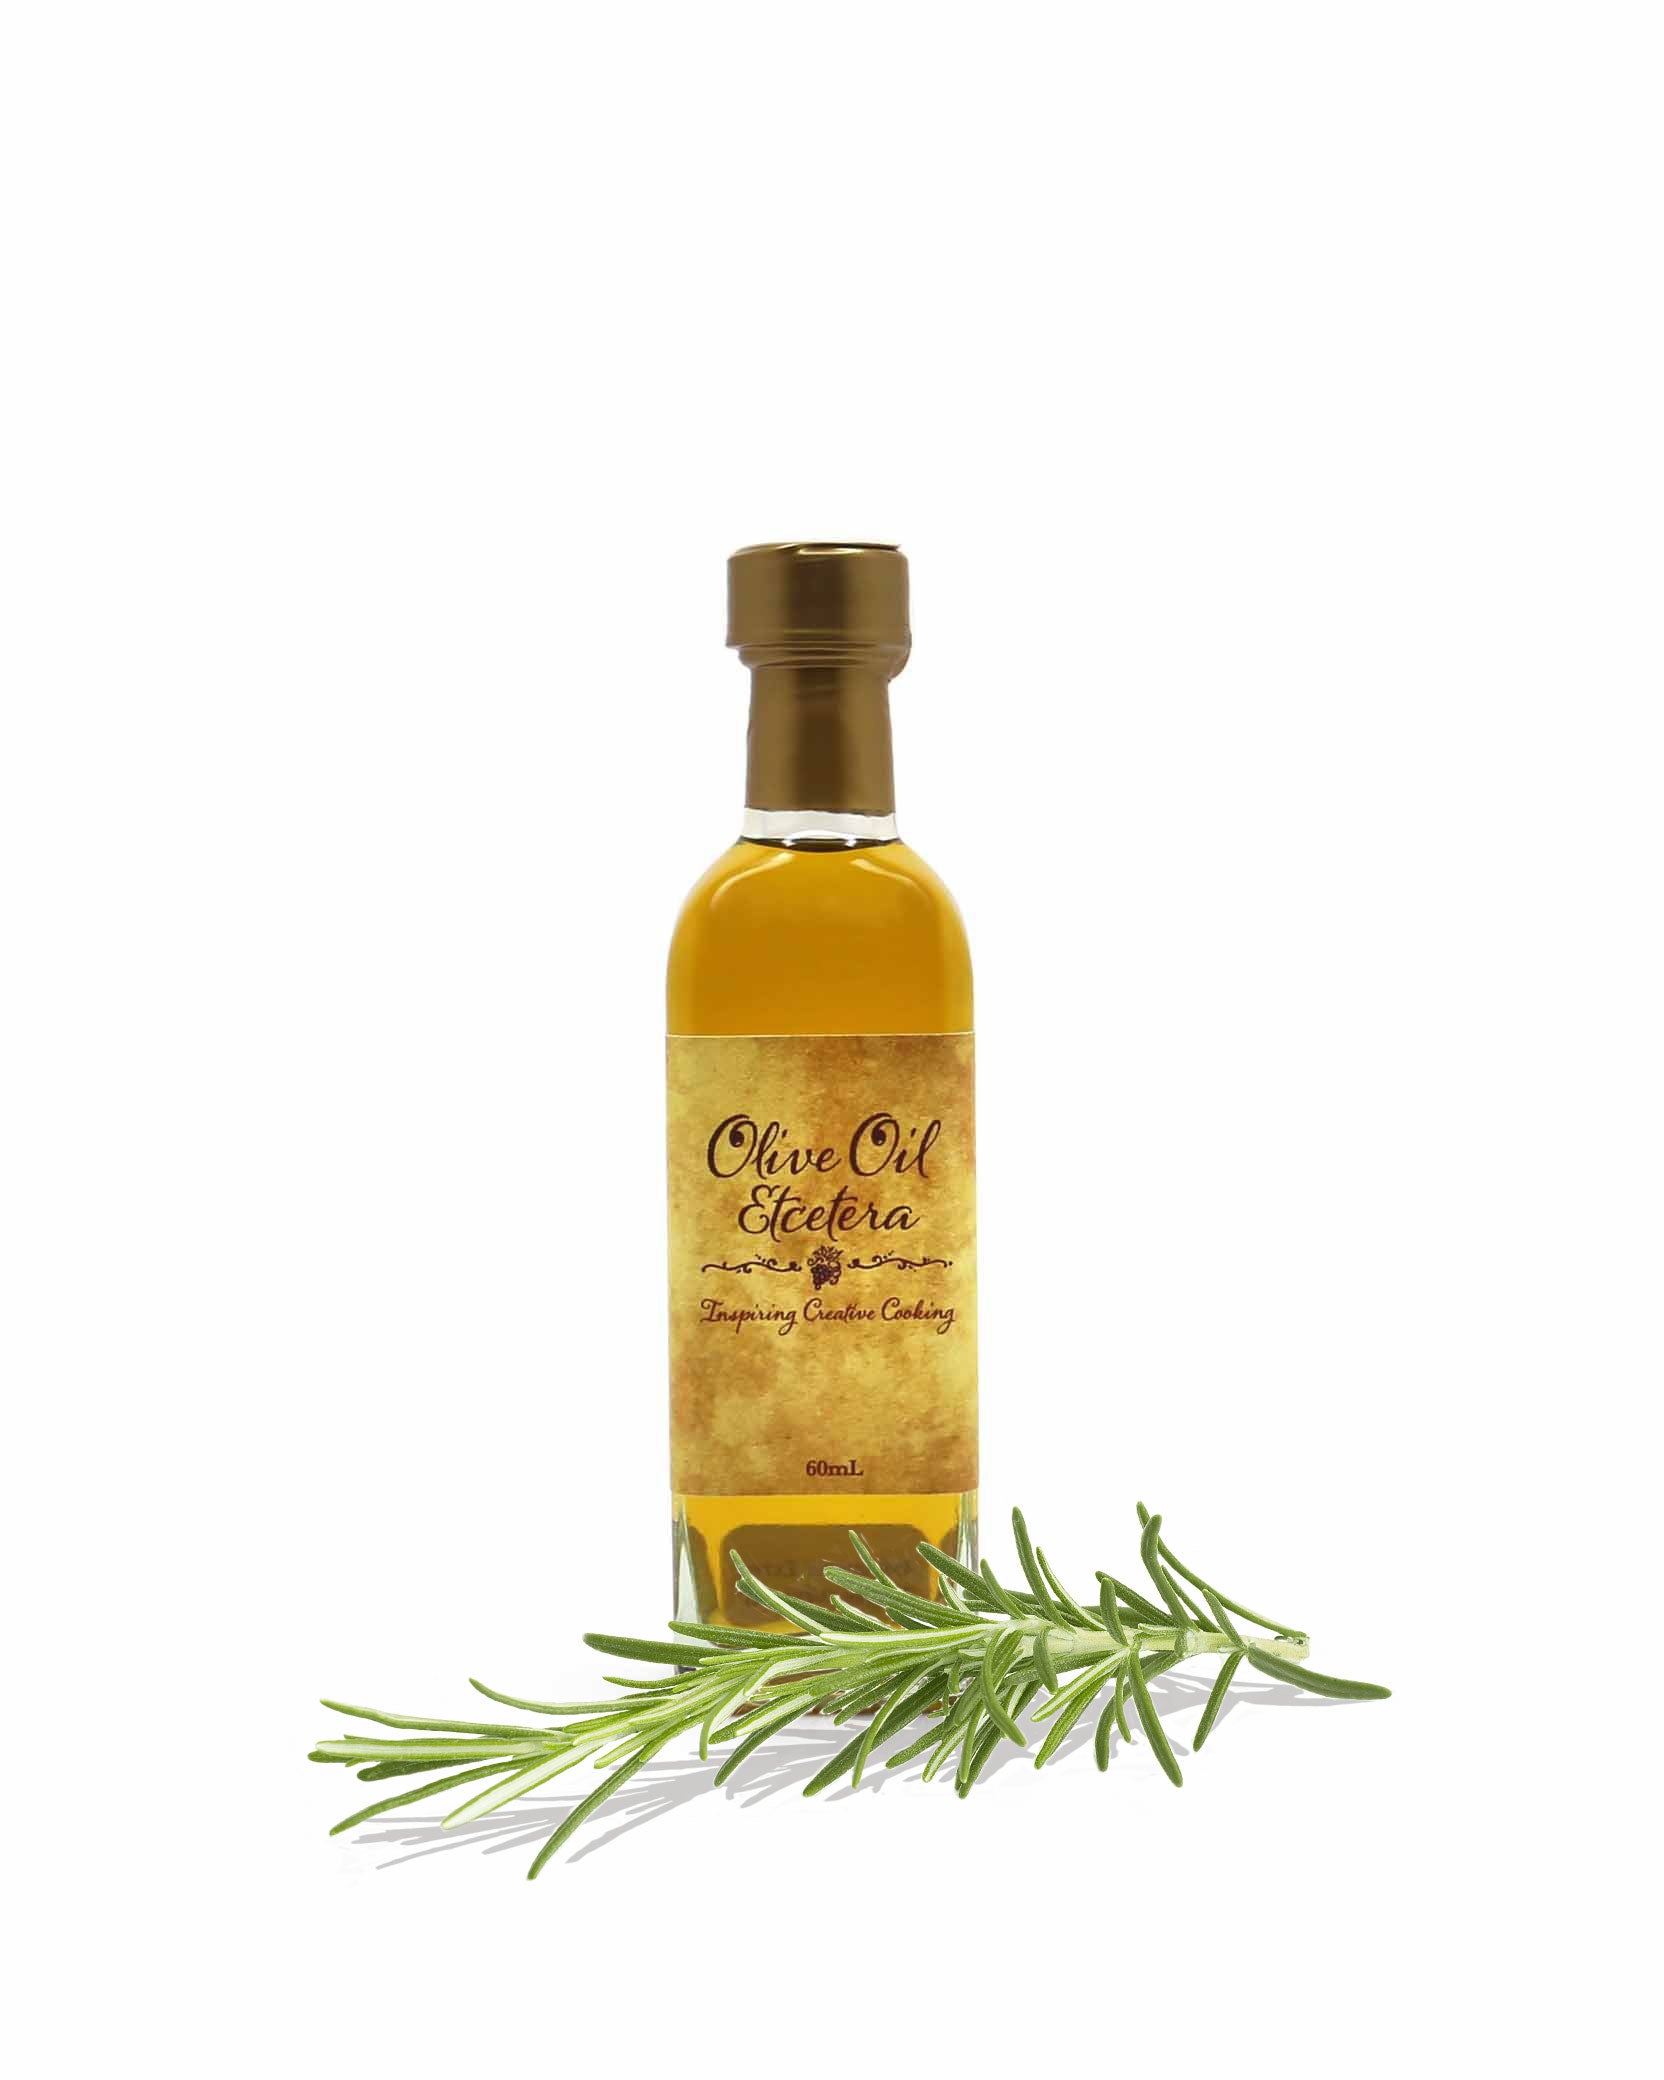 Rosemary Olive Oil - Olive Oil Etcetera - Bucks county's gourmet olive oil and vinegar shop